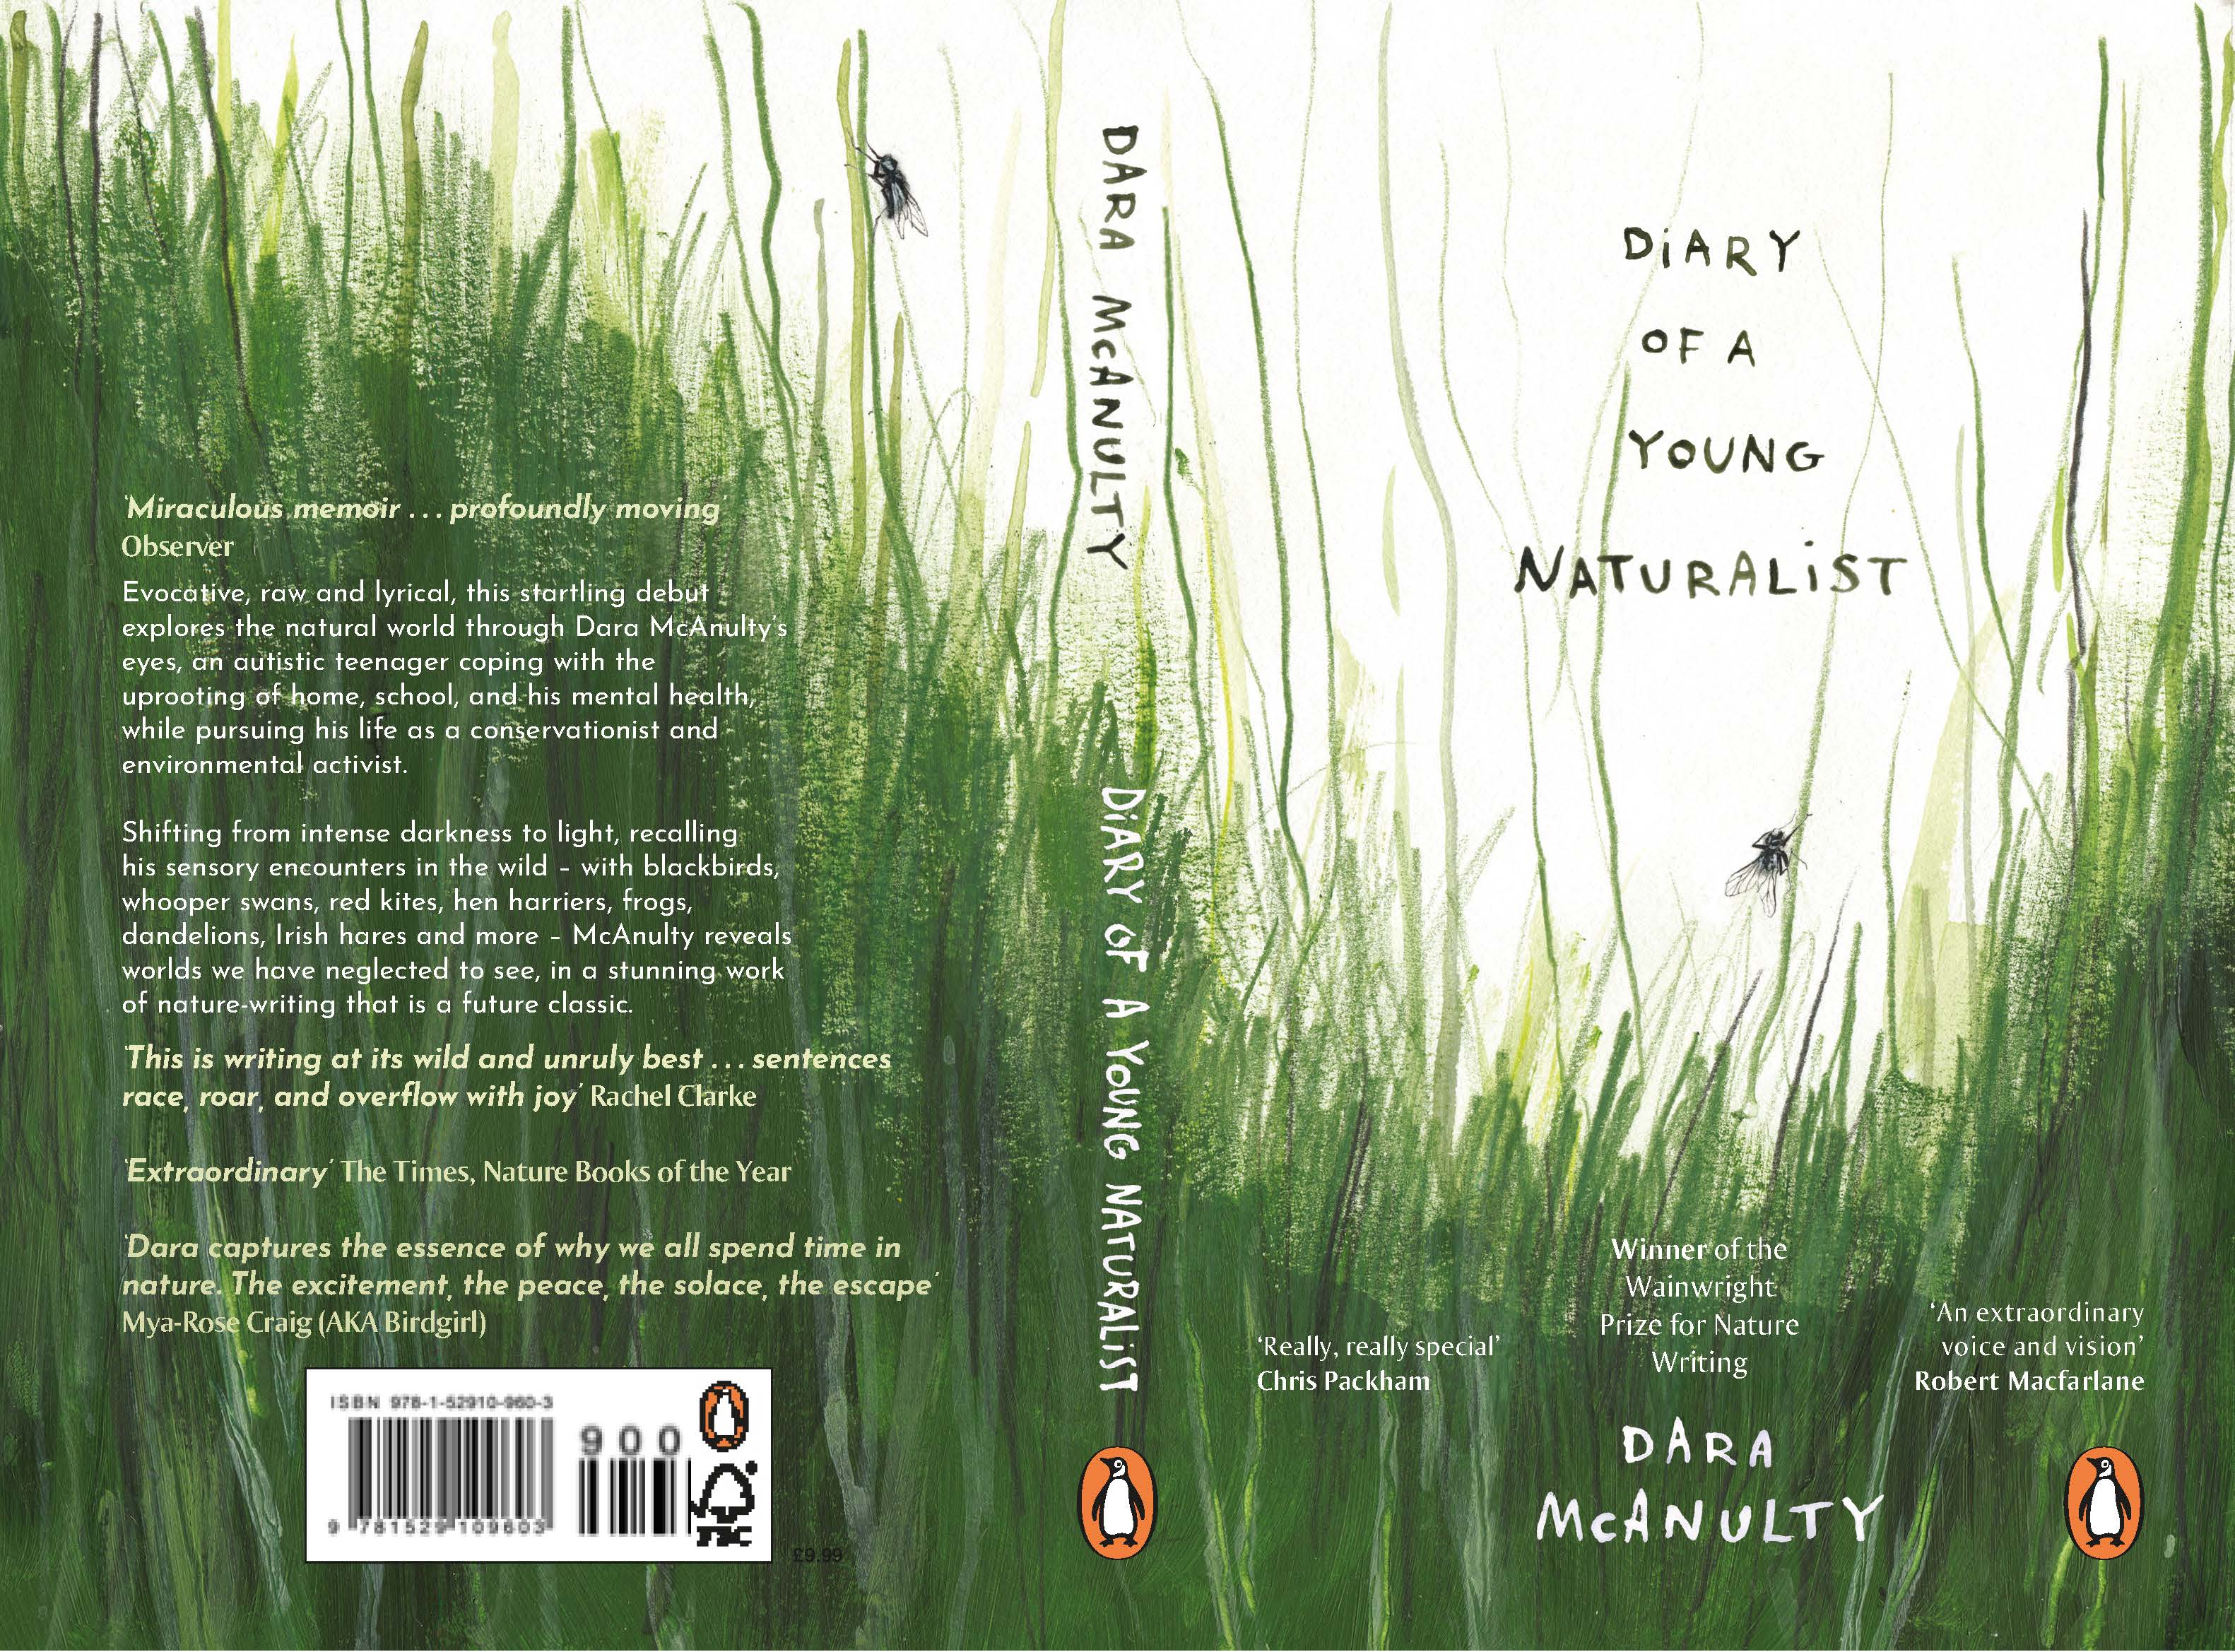 Lilja Cardew's cover design of 'Diary of a Young Naturalist'